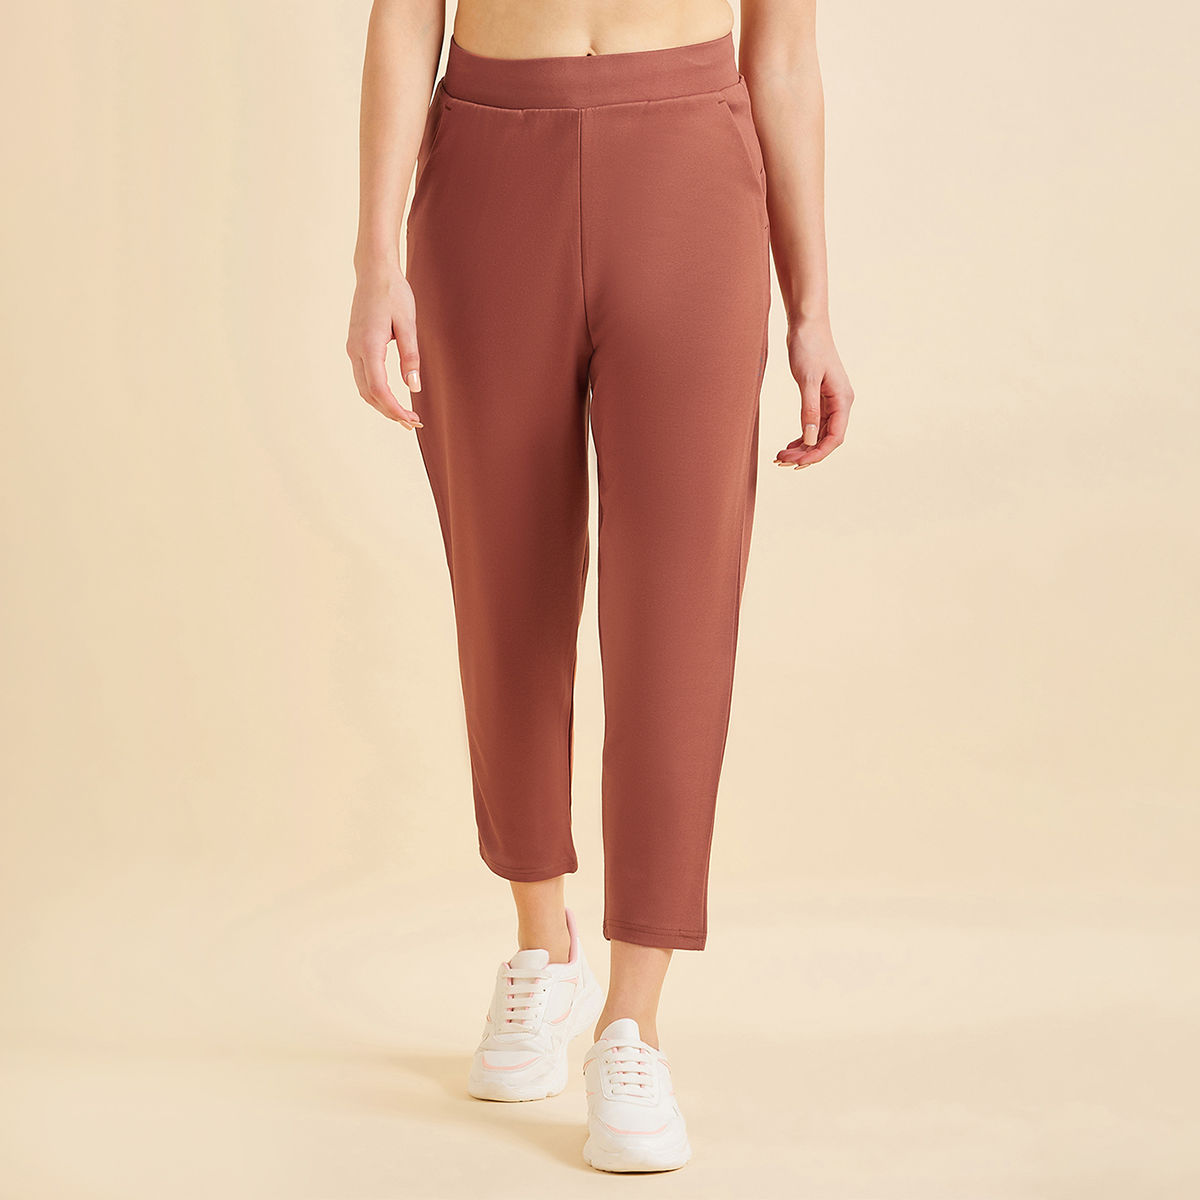 Puma Ess Women's Casual Track Pants - Grey: Buy Puma Ess Women's Casual Track  Pants - Grey Online at Best Price in India | Nykaa